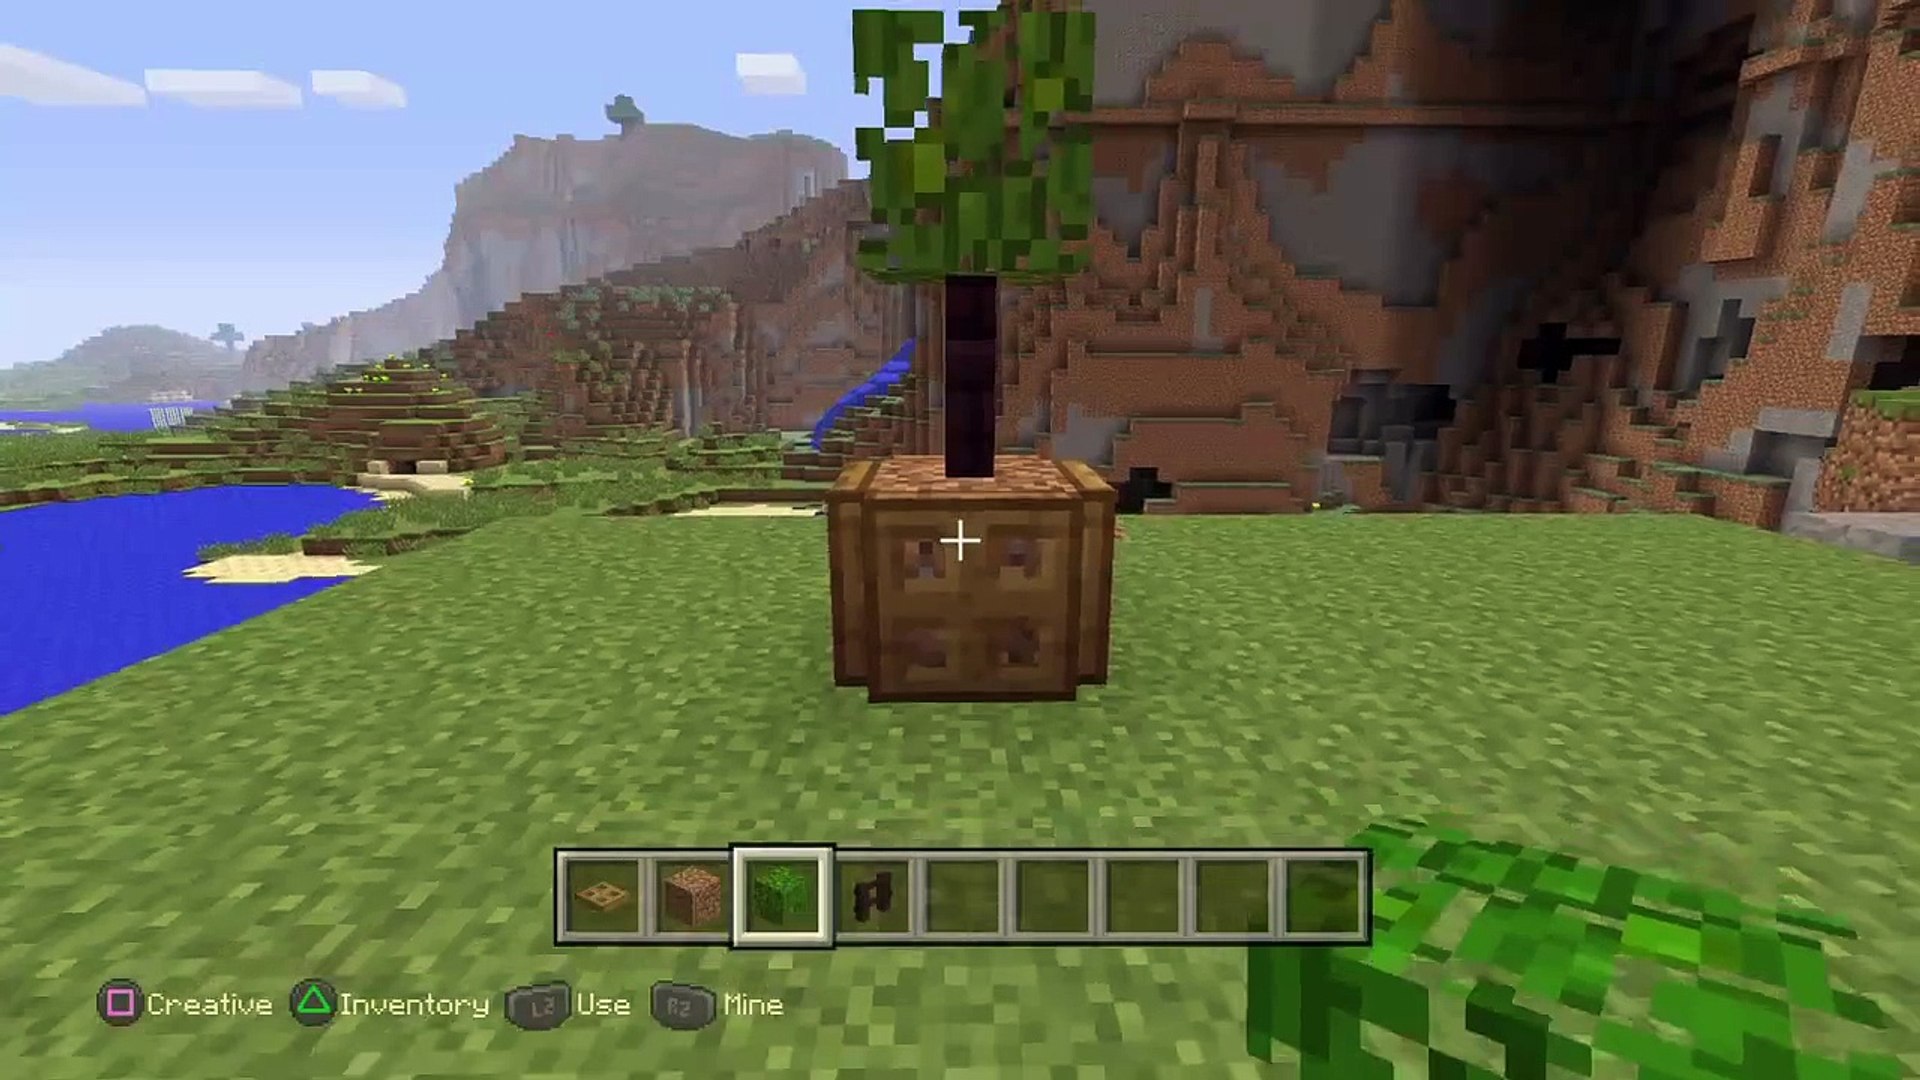 How to make a pot in minecraft